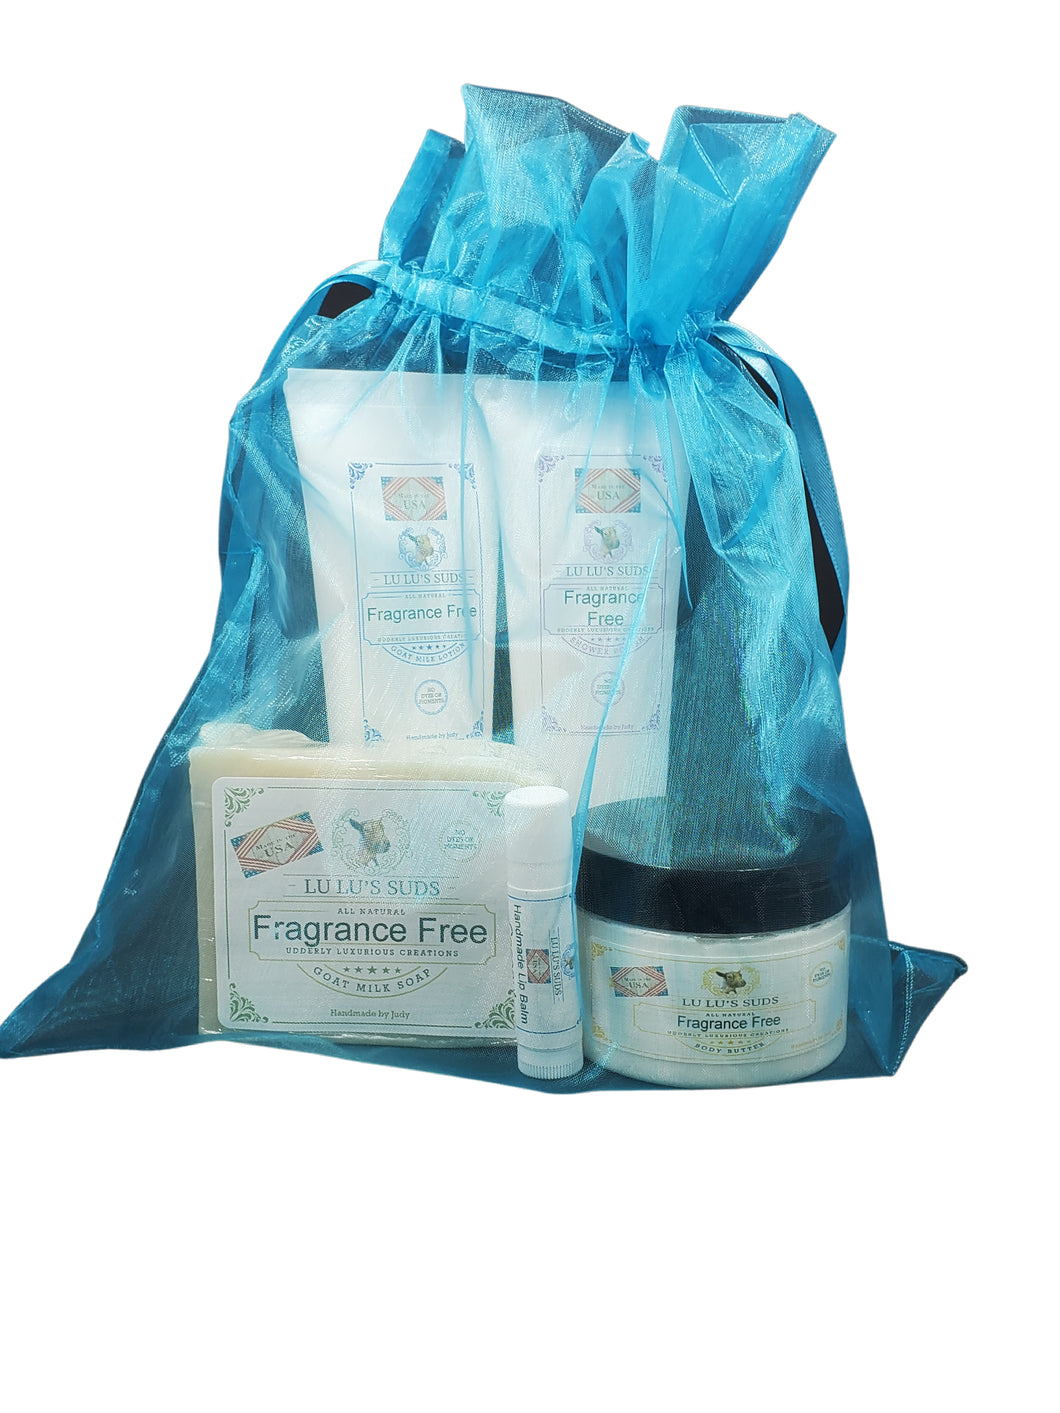 Anthony's Ocean Breeze Soap, Lotion, Body Butter, Shower Polish Gift Set